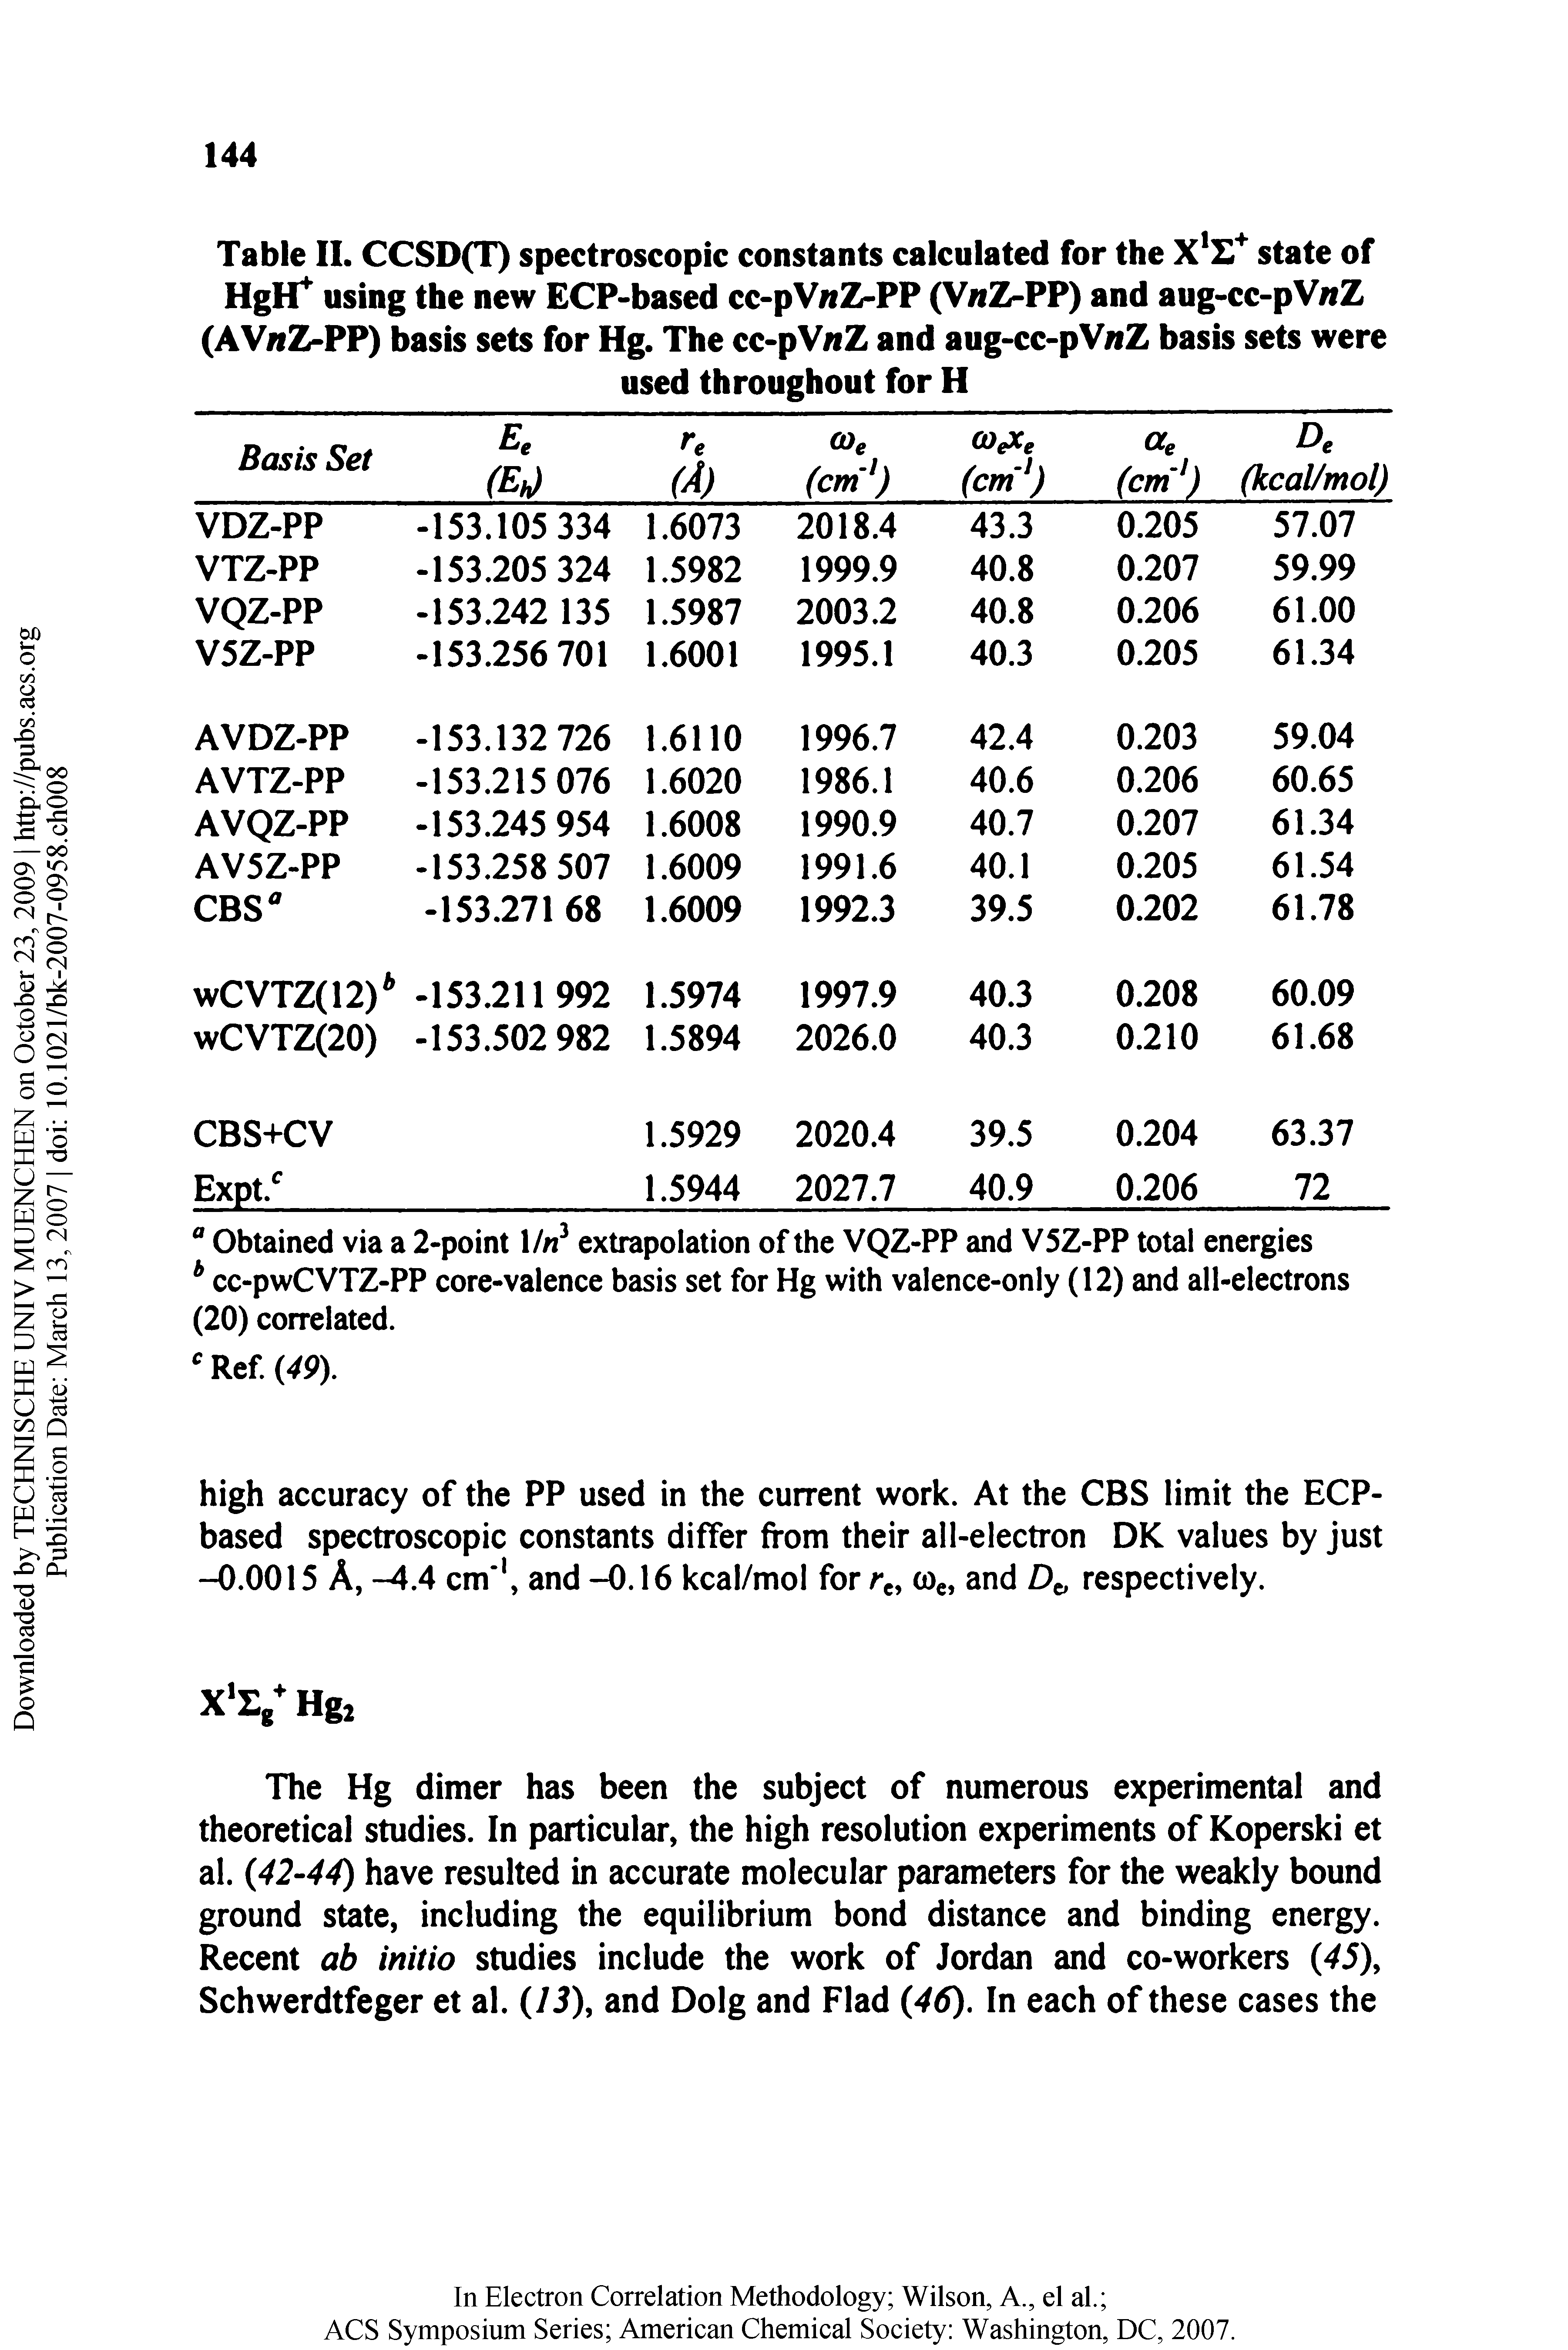 Table II. CCSD(T) spectroscopic constants calculated for the X state of HgH using the new ECP-based cc-pVwZ-PP (VifZ-PP) and aug-cc-pViiZ (AV/fZ-PP) basis sets for Hg. The cc-pViiZ and aug-cc-pVwZ basis sets were...